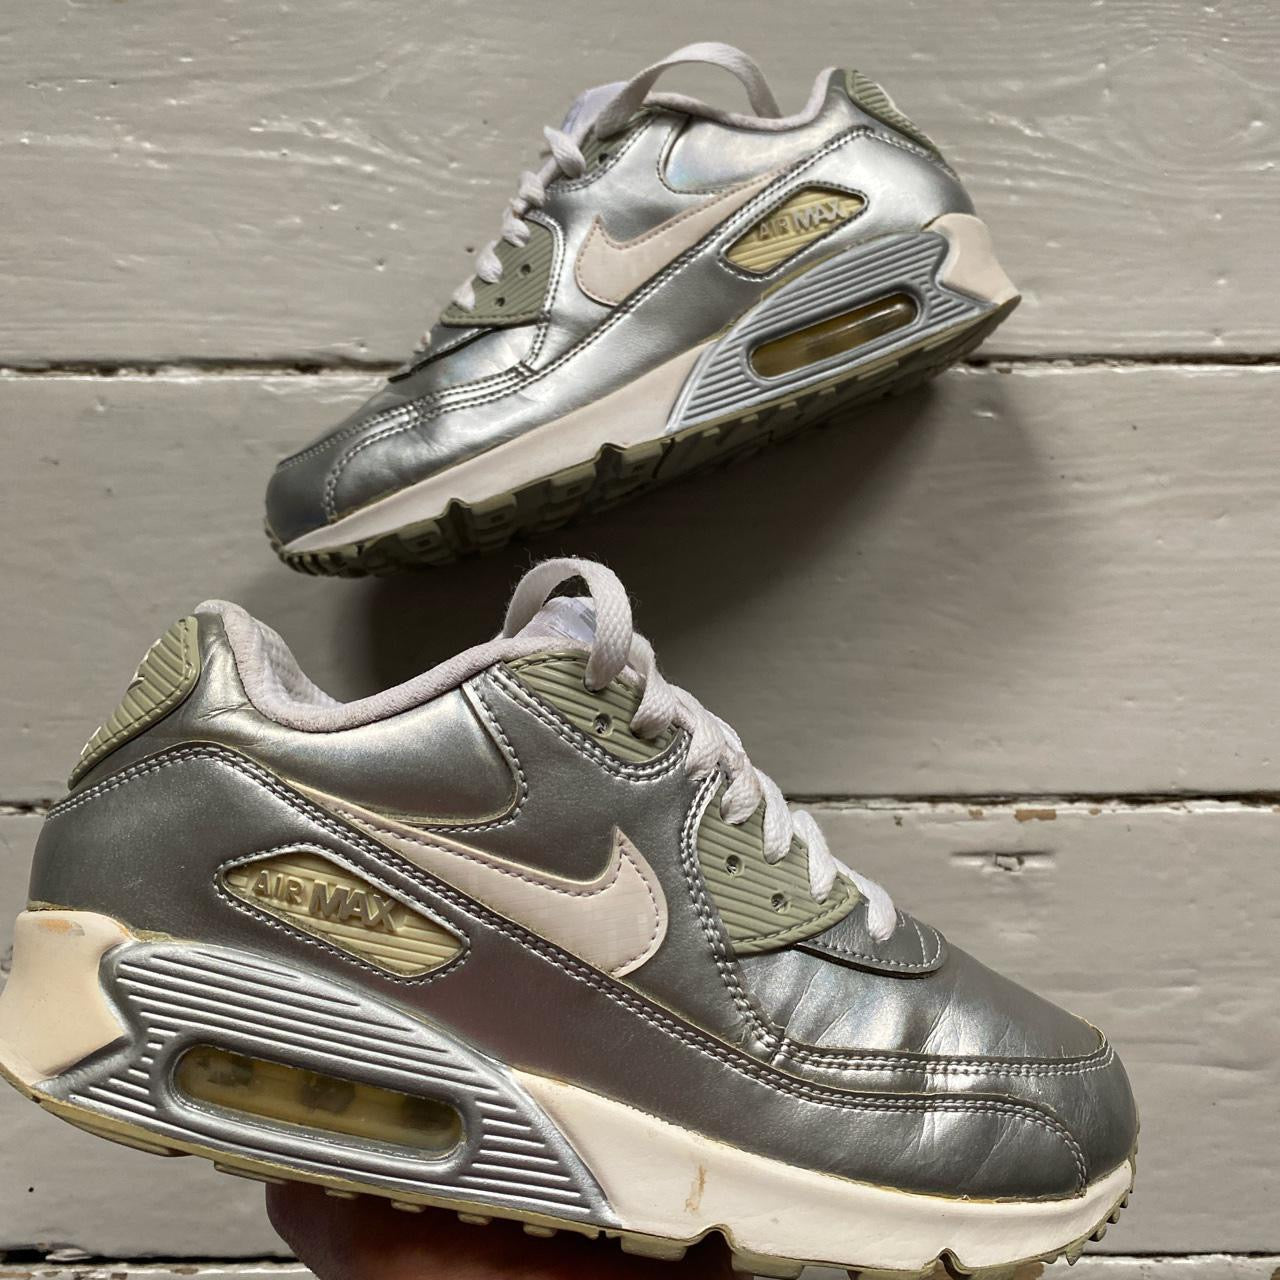 Nike Air Max 90 Silver and White (UK 5)